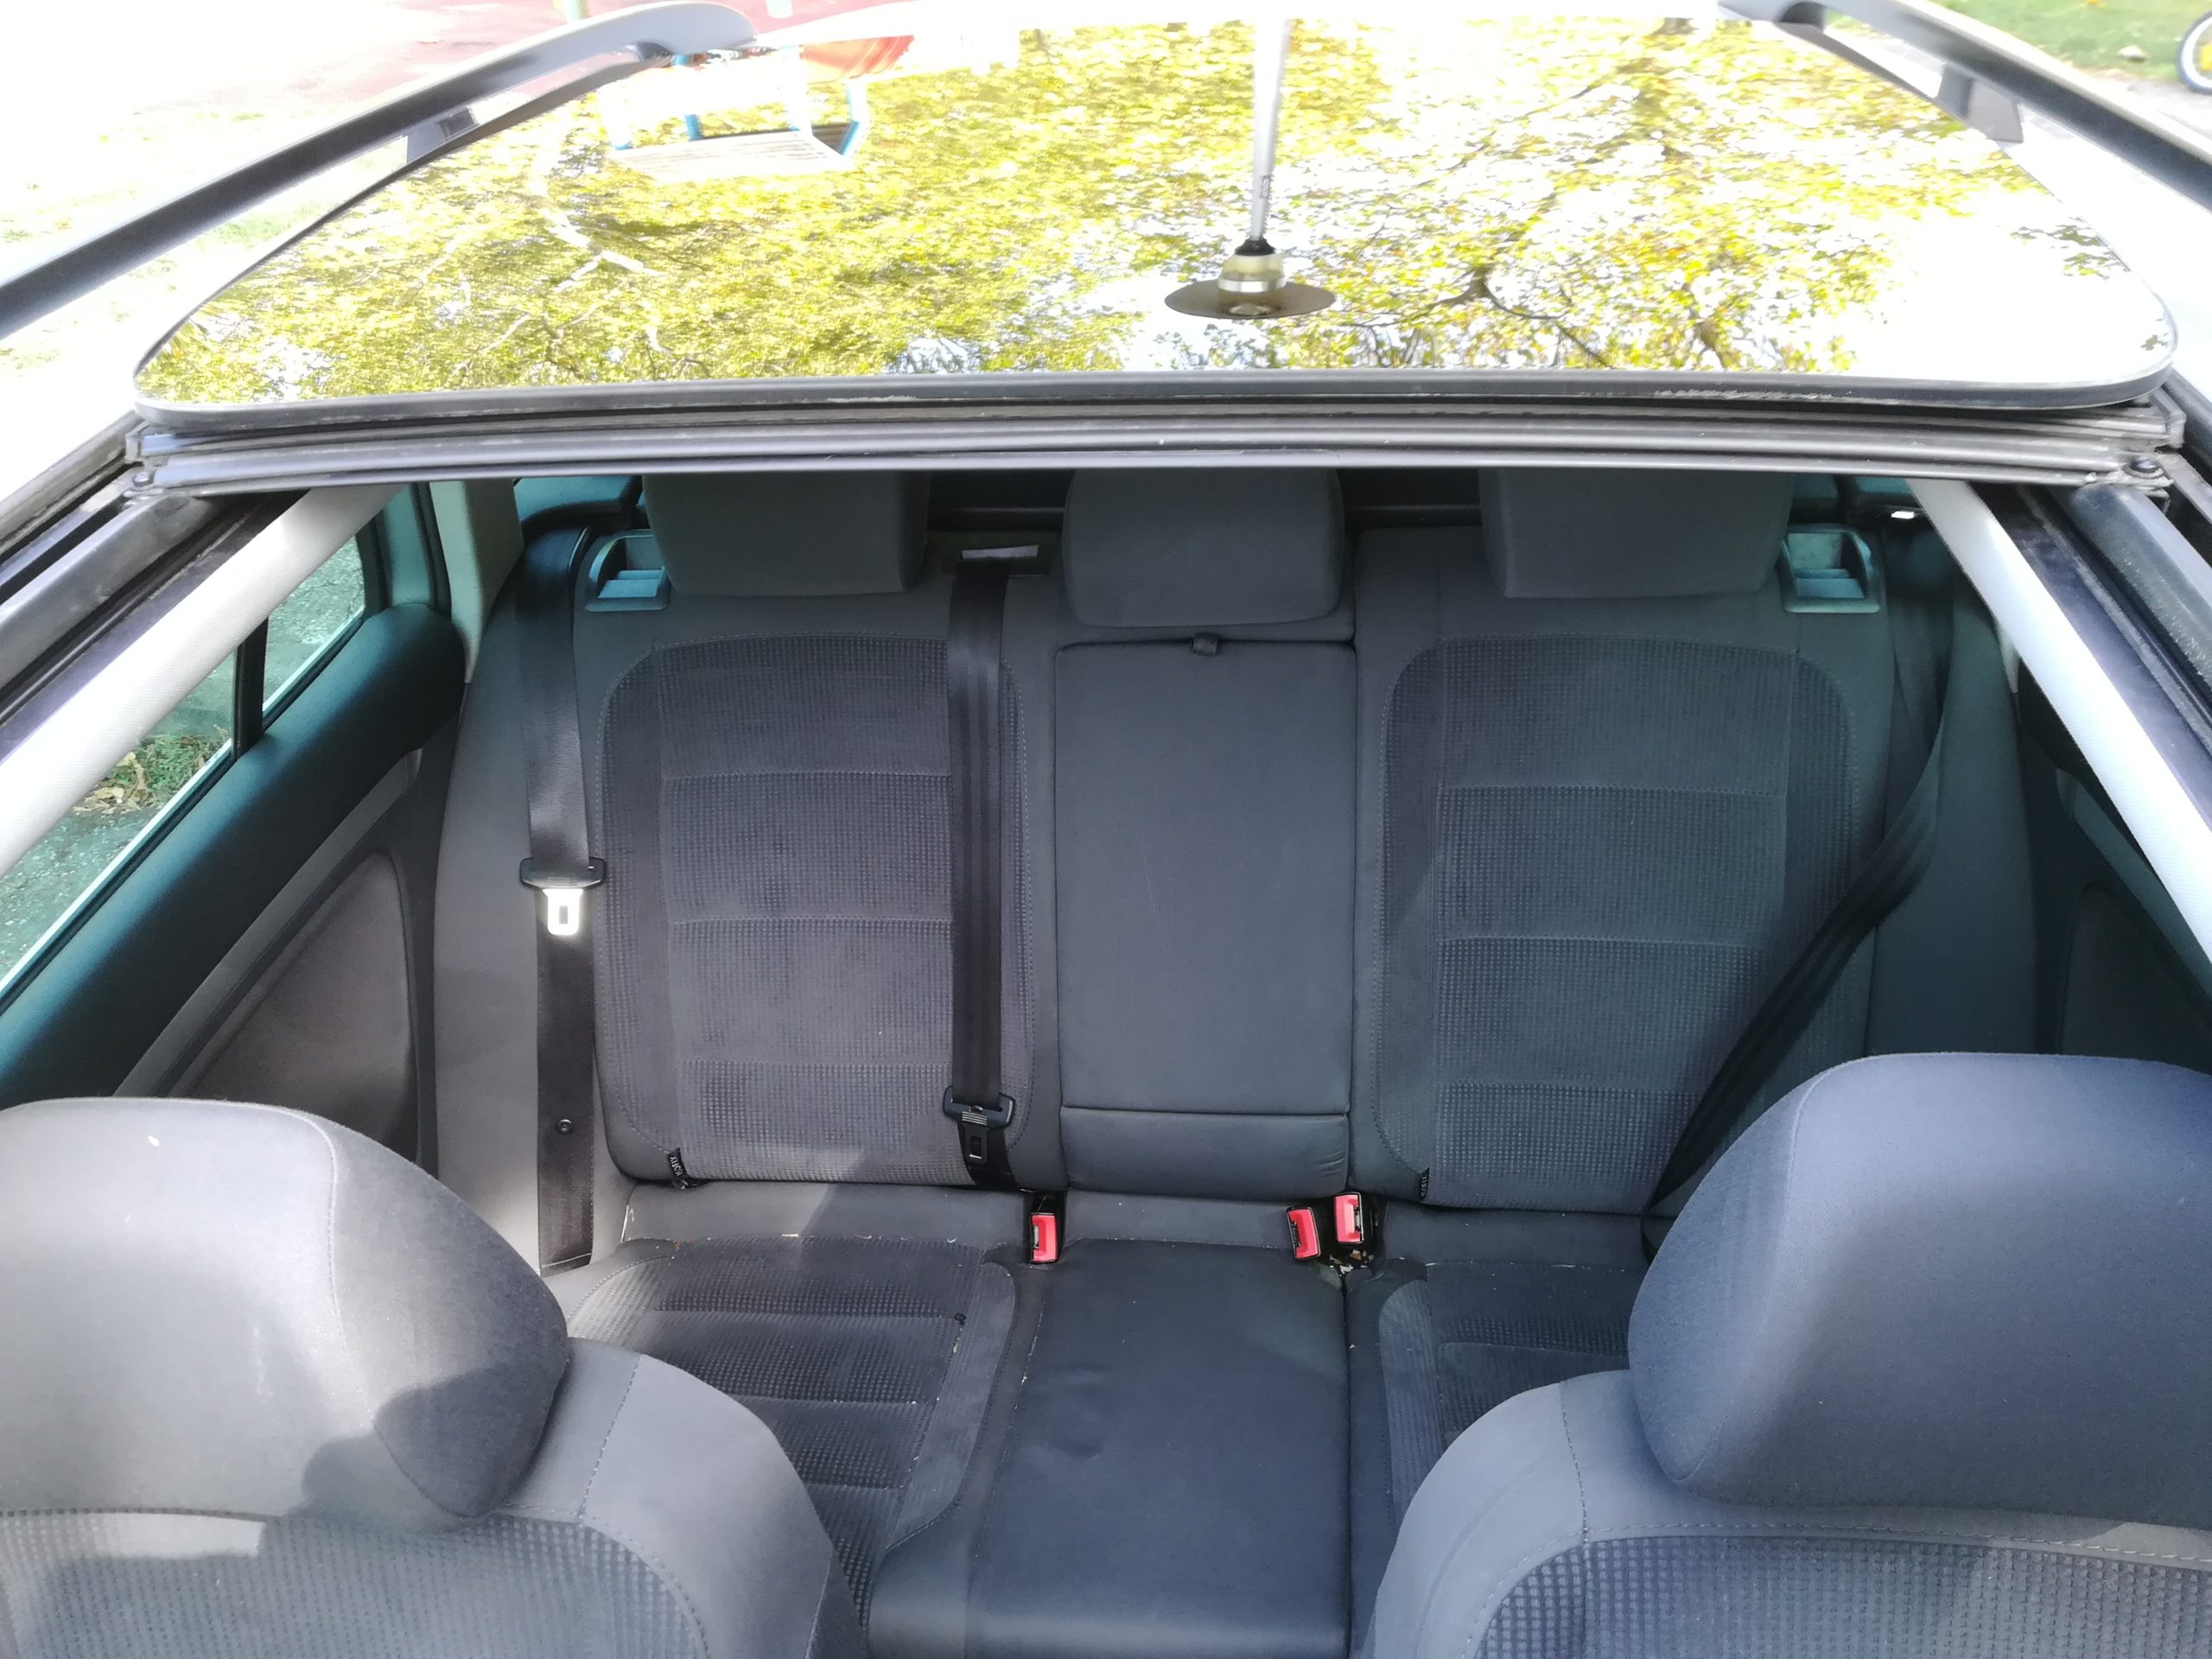 maintenance position - sunroof features